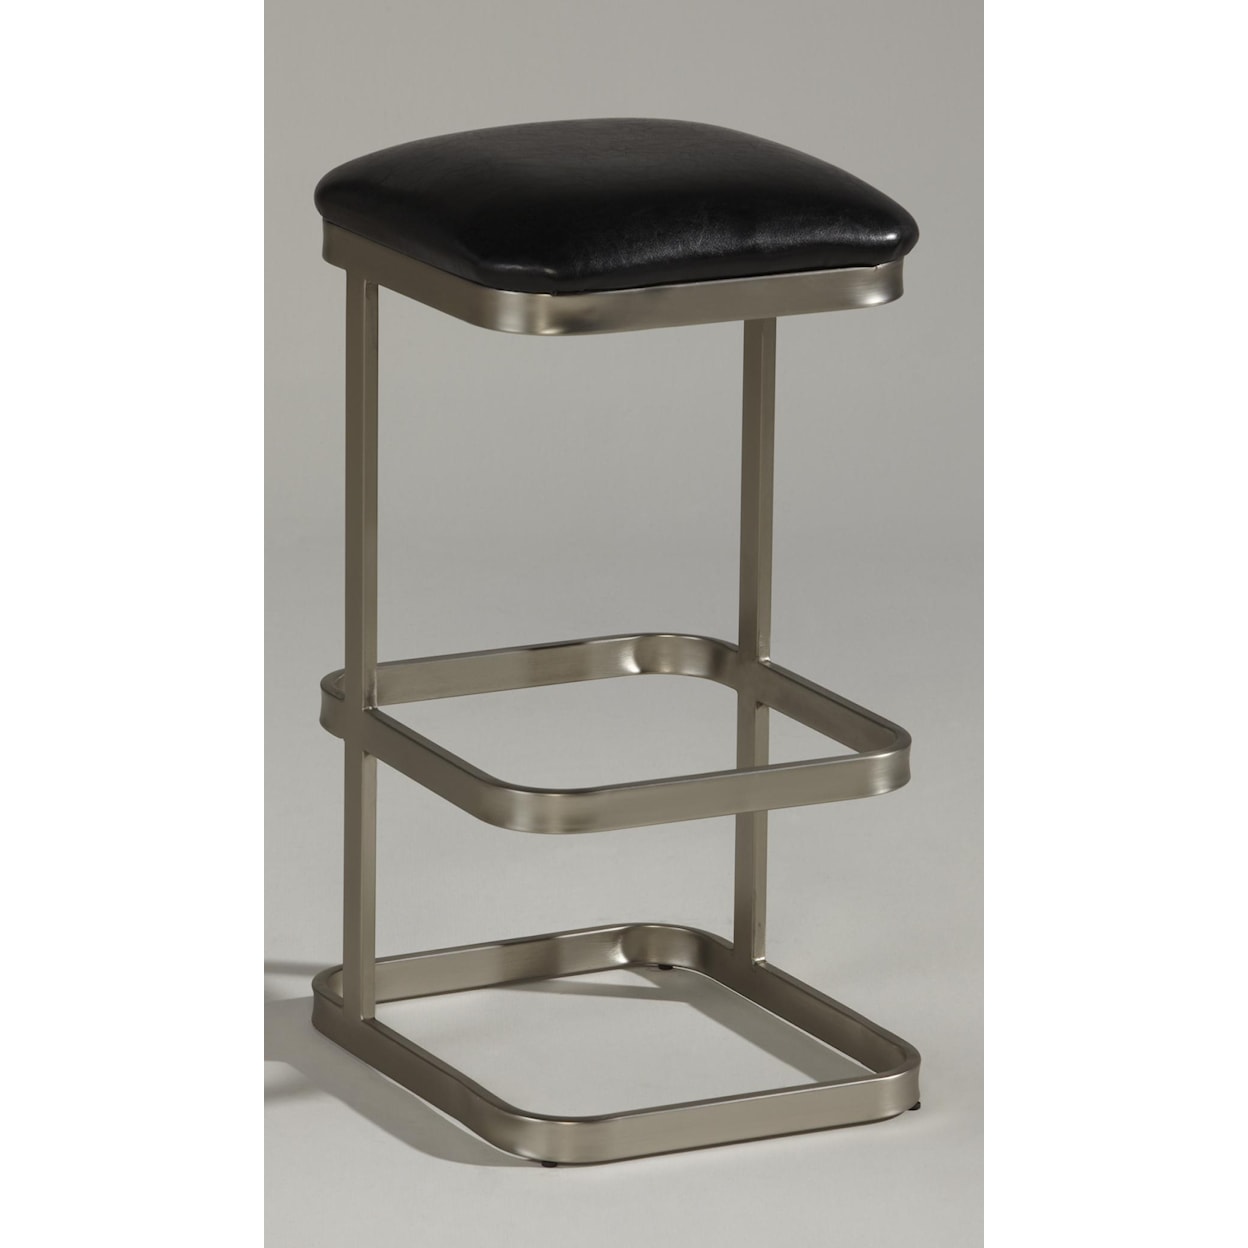 Chintaly Imports Stools  30" Backless Barstool with Suede Seat